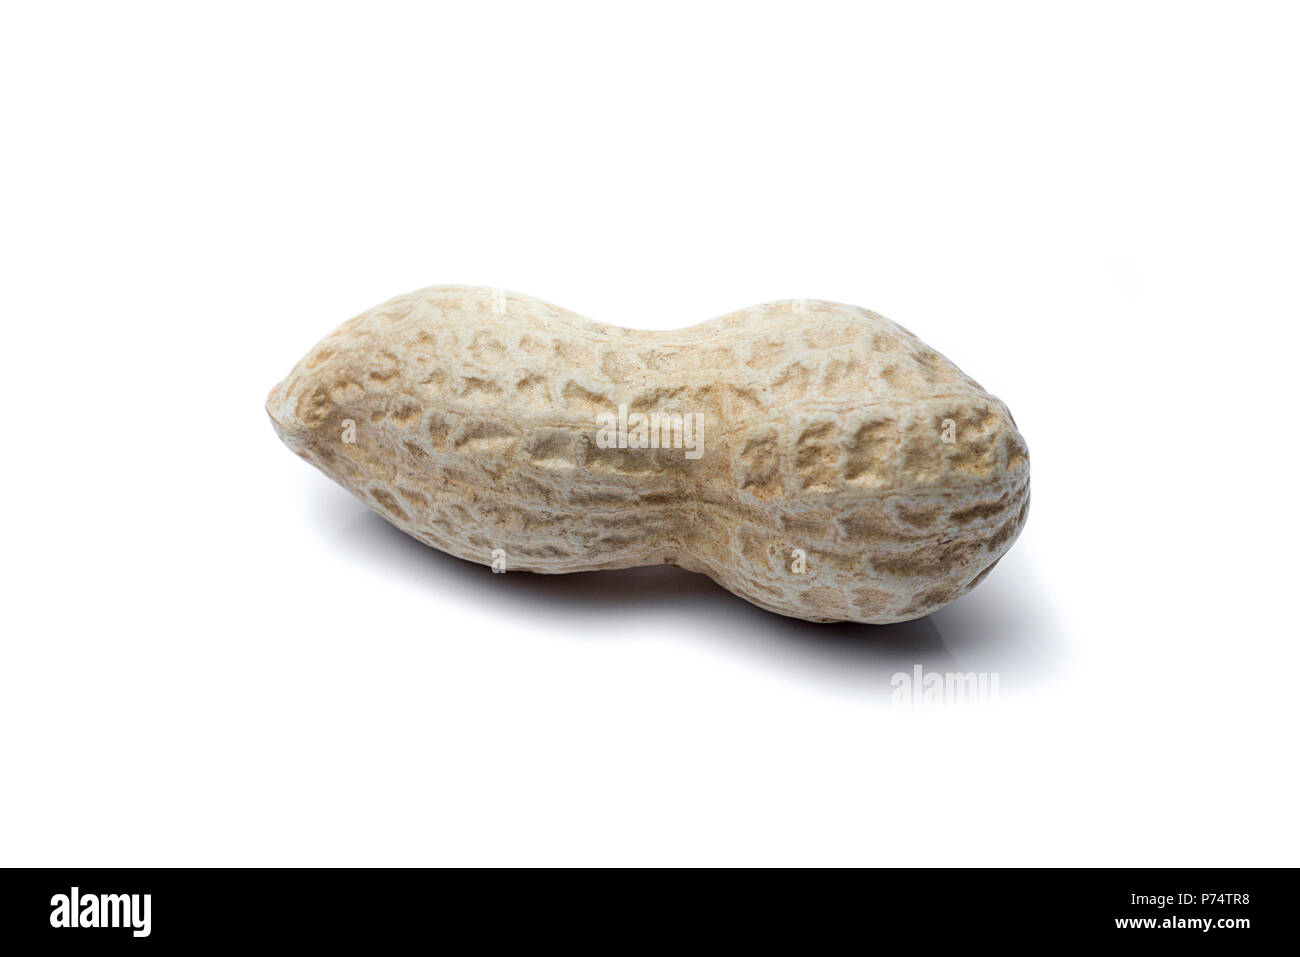 one peanuts isolated on white background in horizontal position. Stock Photo